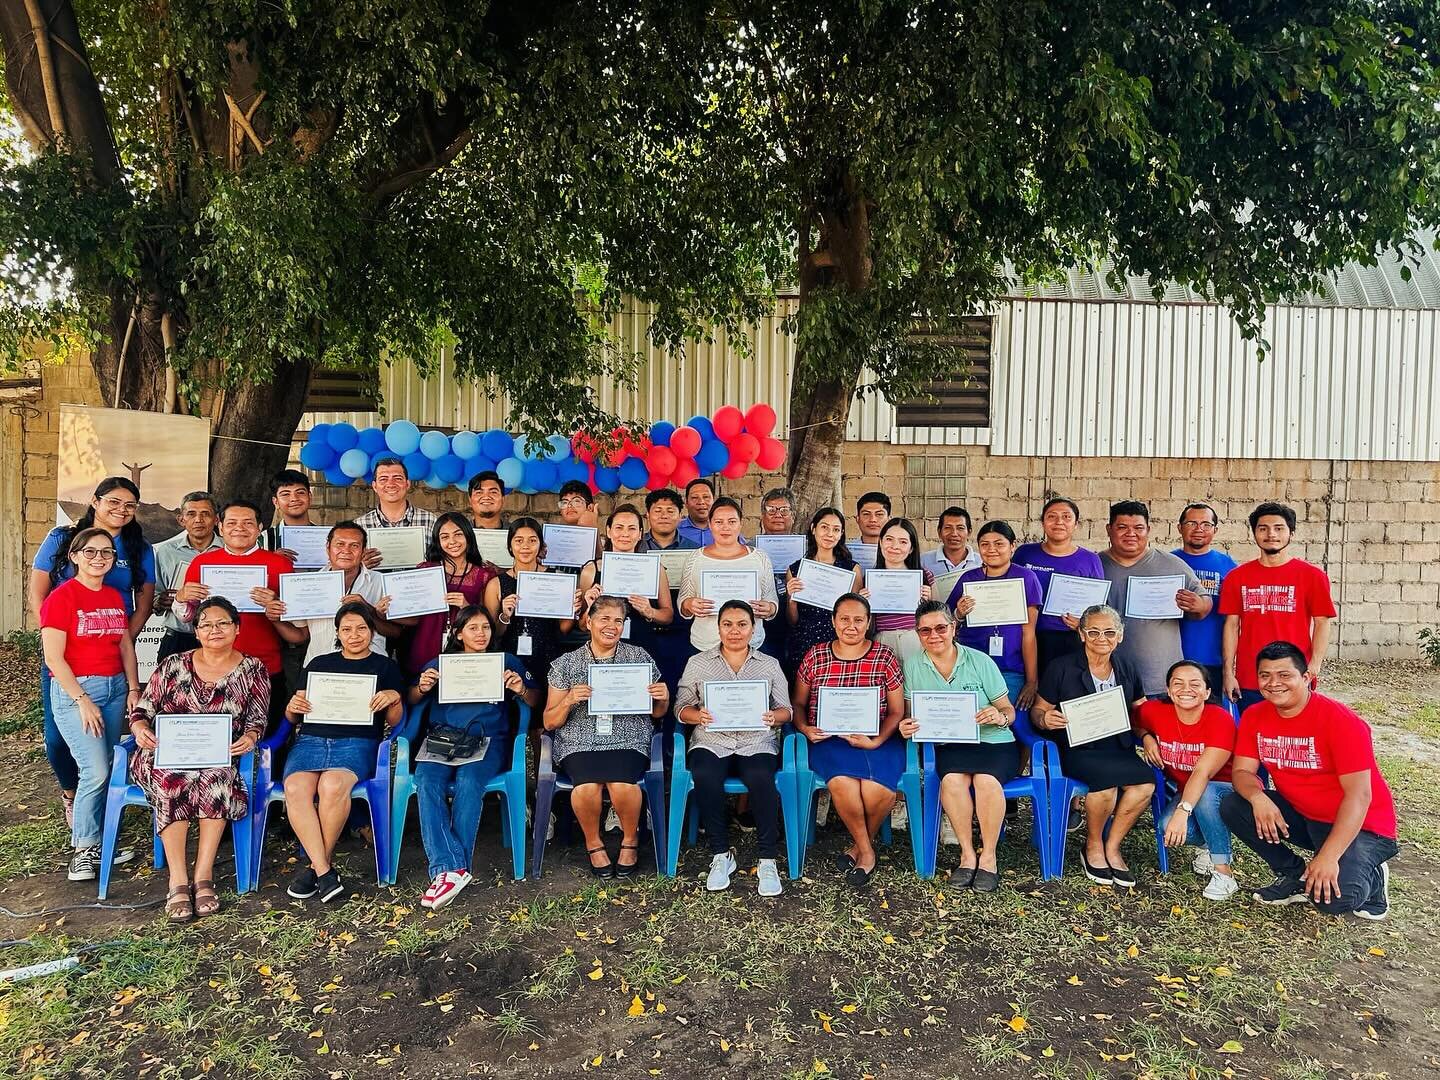 Gloria a Dios 🙌! Celebrating 🥳 with ILI El Salvador 🇸🇻 and all the new graduates 🎓 from a recent History Makers training event. This team also made a huge impact at an influential leadership conference helping over 200 leaders experience intimac